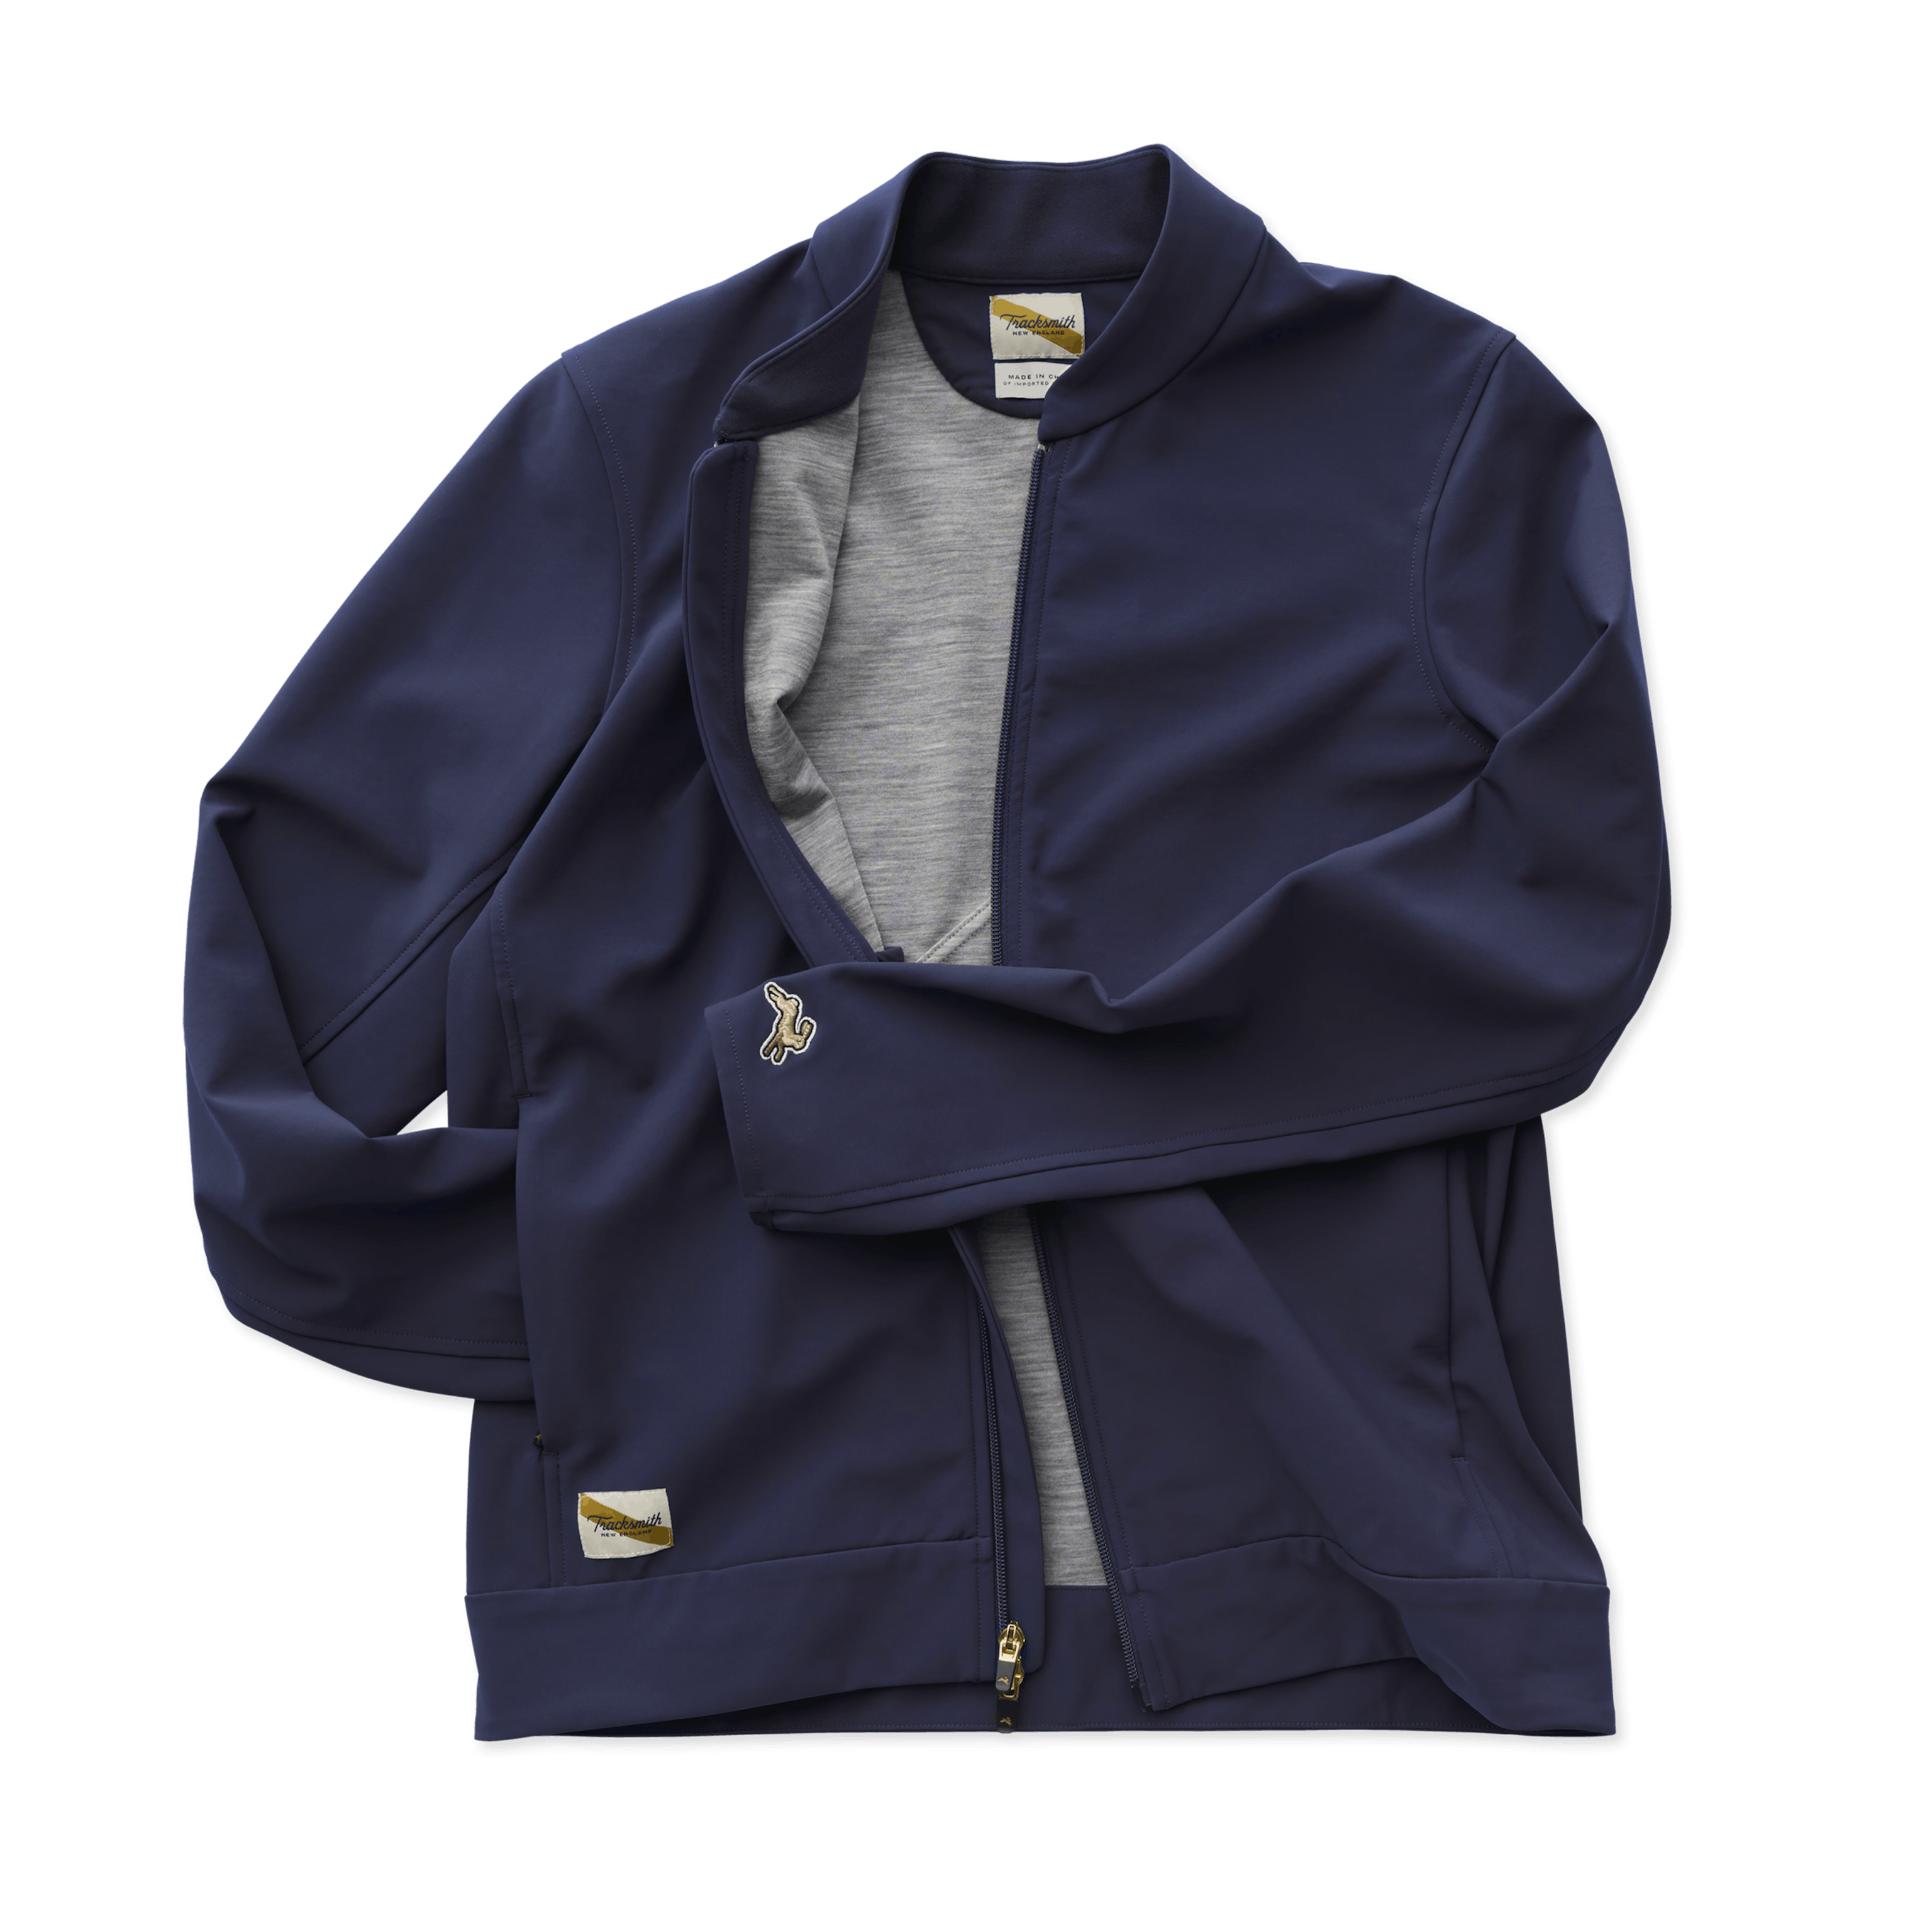 https://www.datocms-assets.com/24486/1708108383-fall23-mens-noreaster-jacket-navy-messy.png?auto=format,compress&crop=faces&dpr=2&fit=crop&h=&w=1536